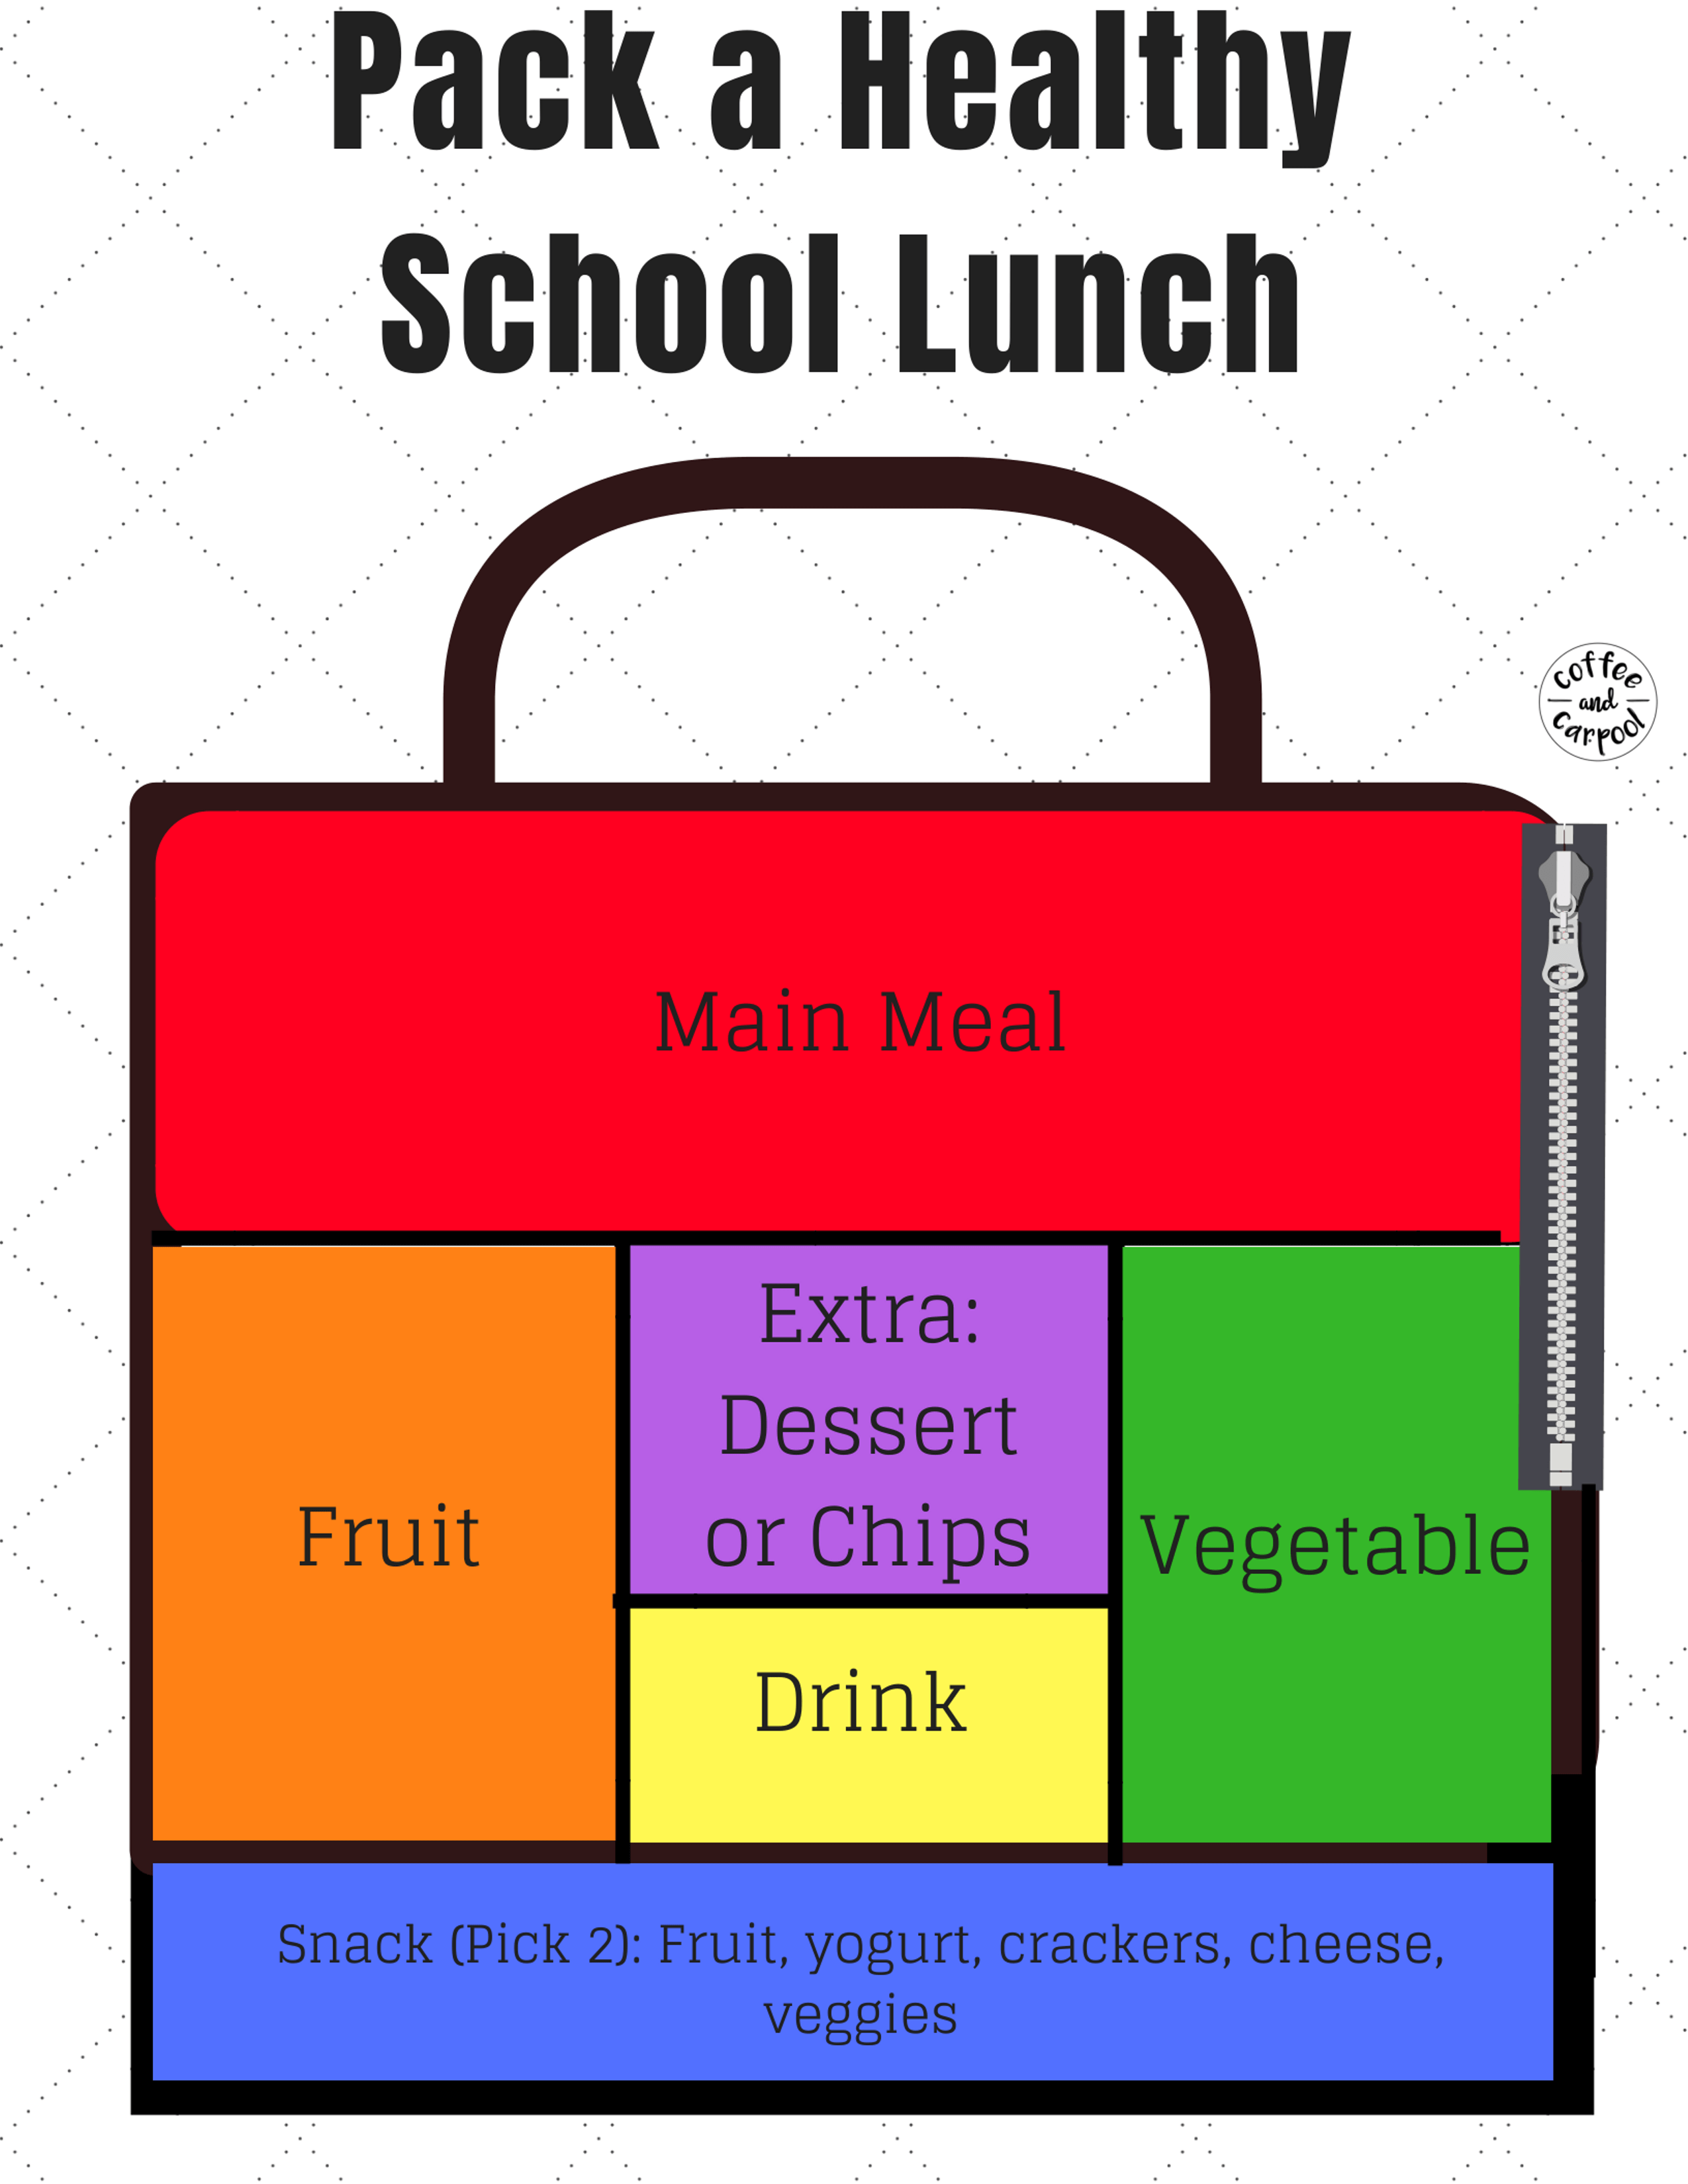 Free Printable to help your kids pack their own school lunches so you don't have to #backtoschooltips #schoollunchideas #easyschoollunches #schoollunchtips #backtoschool #freeprintable #backtoschool #teachkidsindependence #independentkids